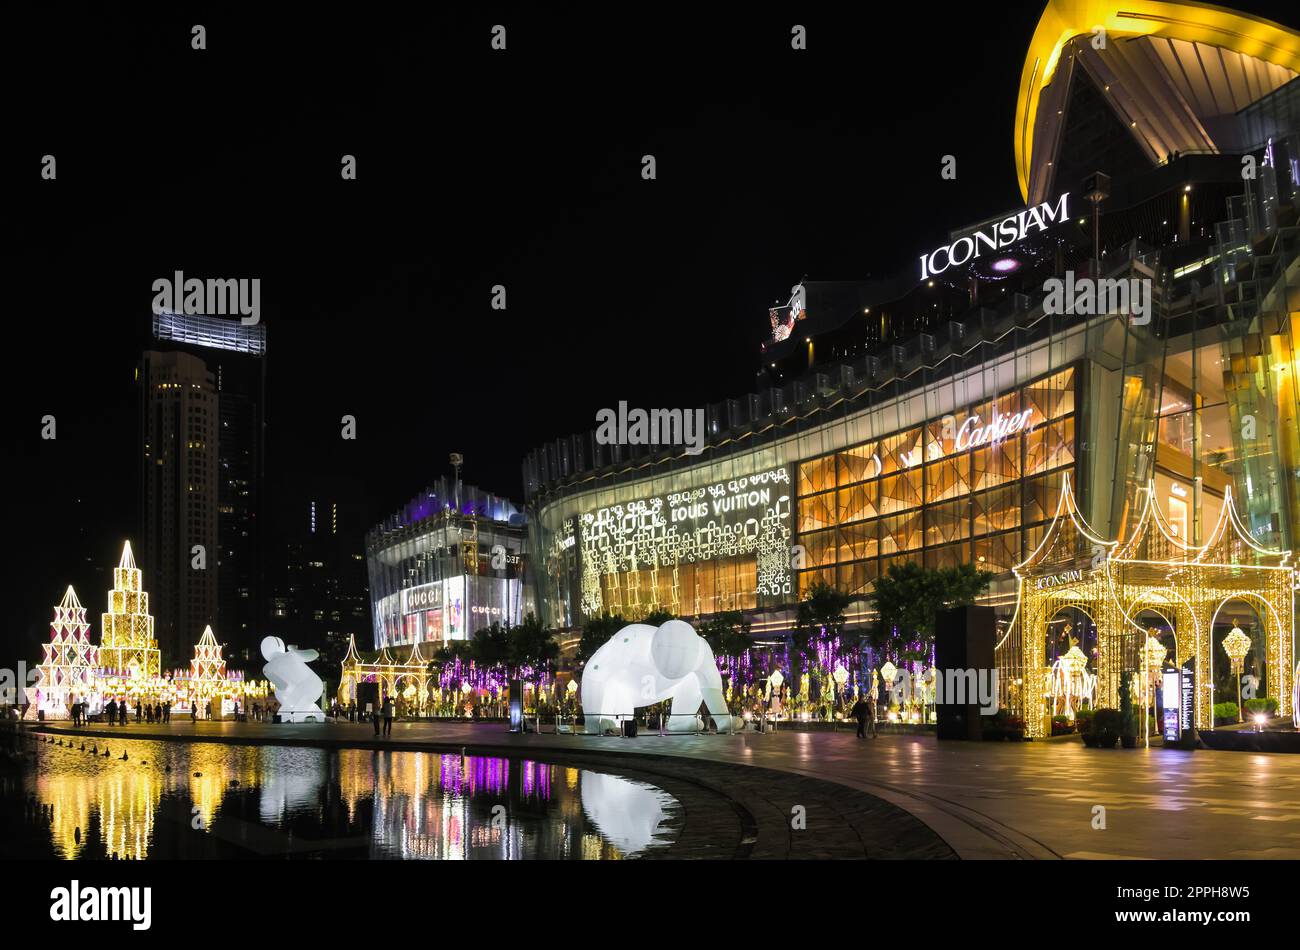 The Oakley Store in the ICON SIAM Shopping Mall. Editorial Stock Photo -  Image of accessories, commercial: 144751573